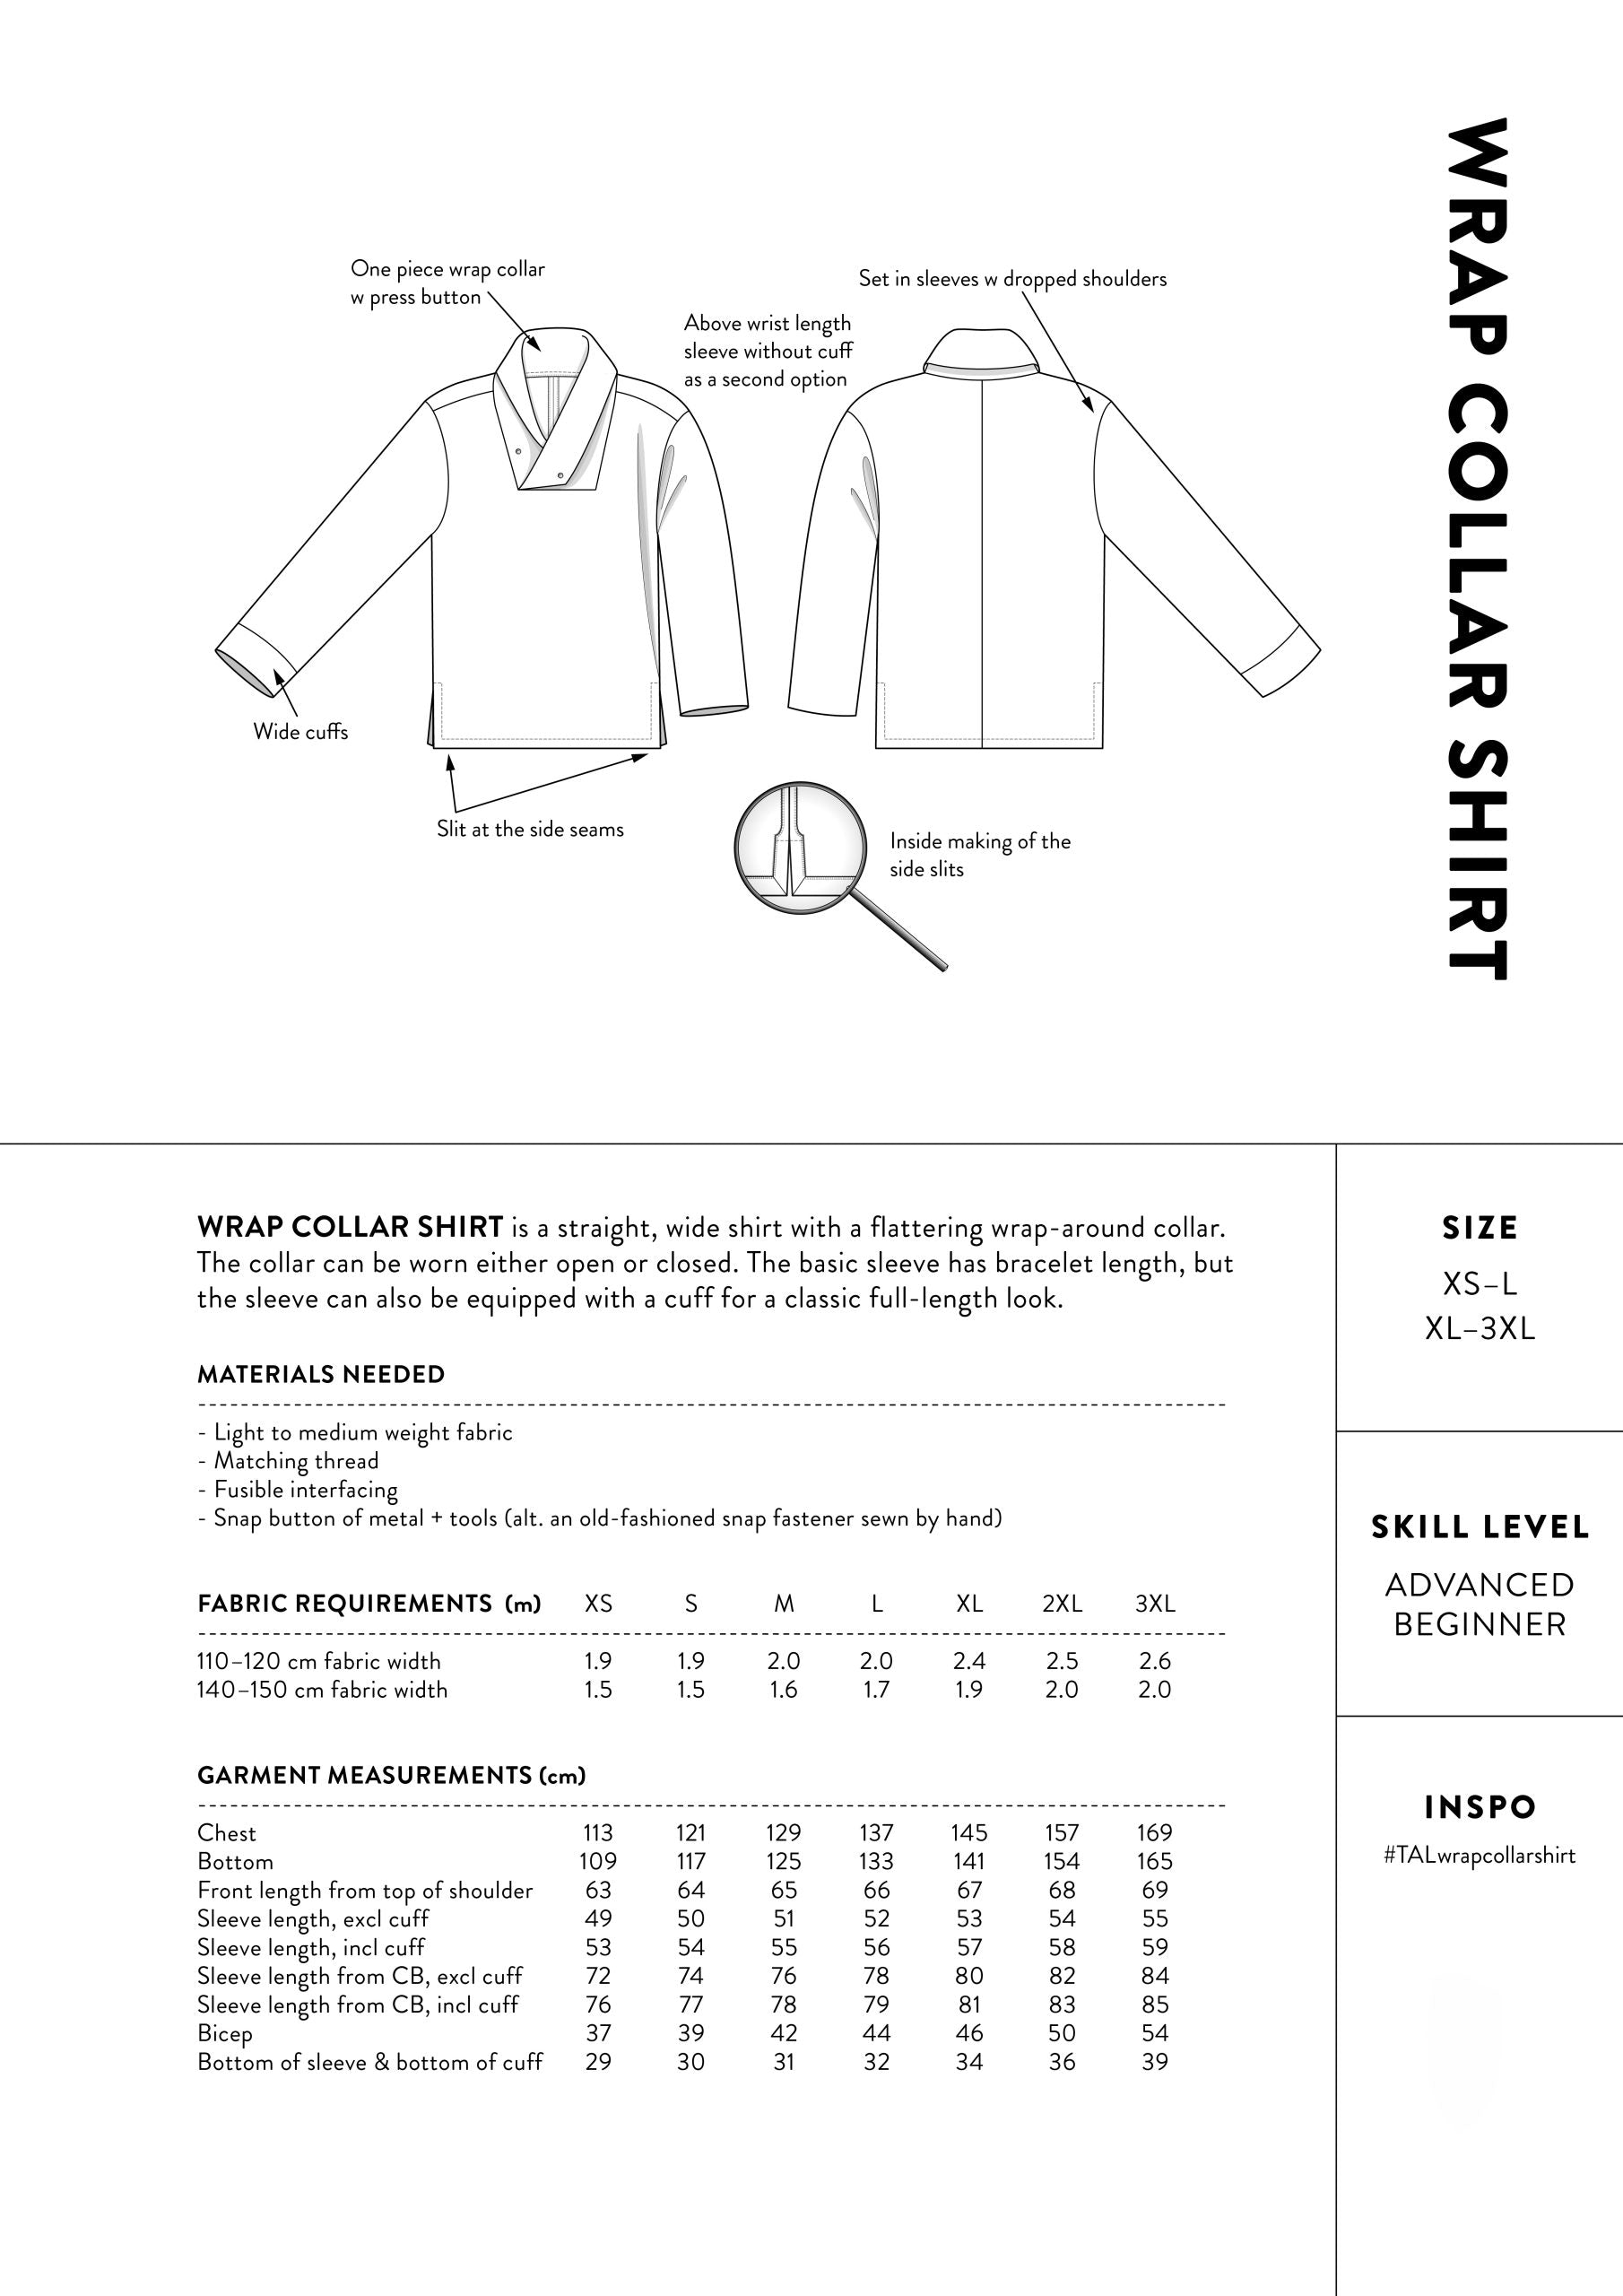 The Assembly Line Unisex Wrap Collar Shirt